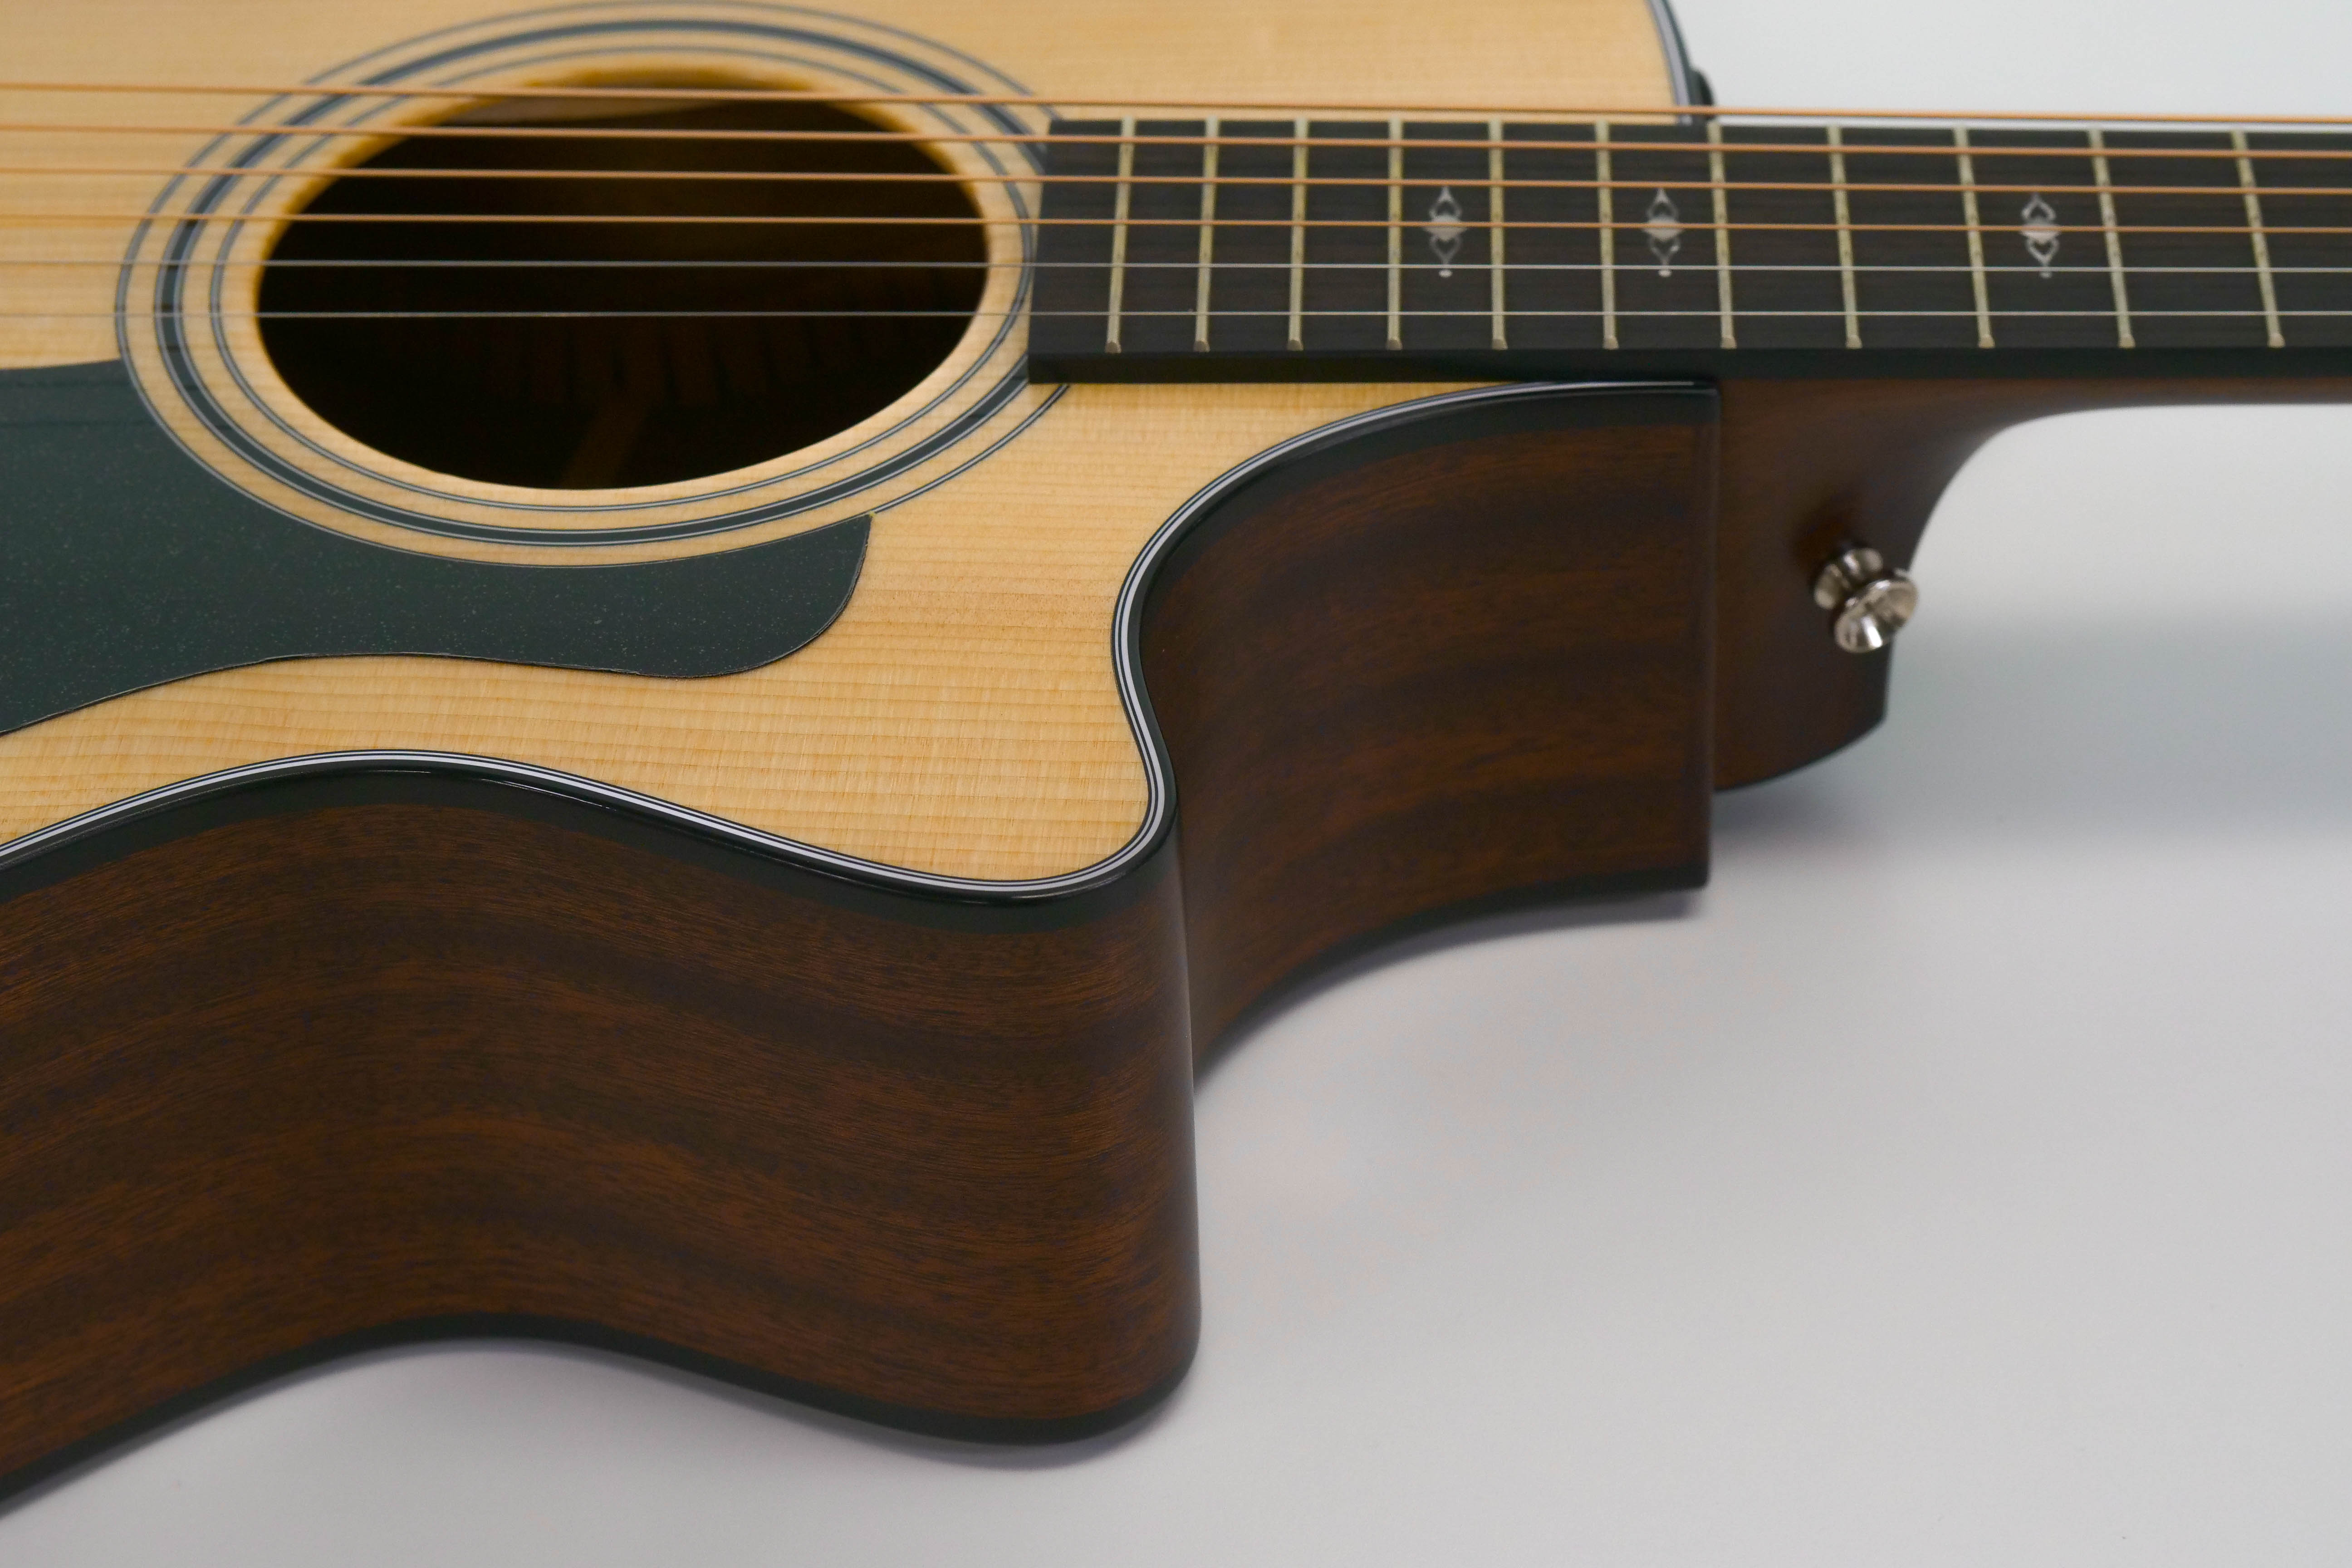 Taylor 312ce V-Class Acoustic-Electric Guitar - Natural